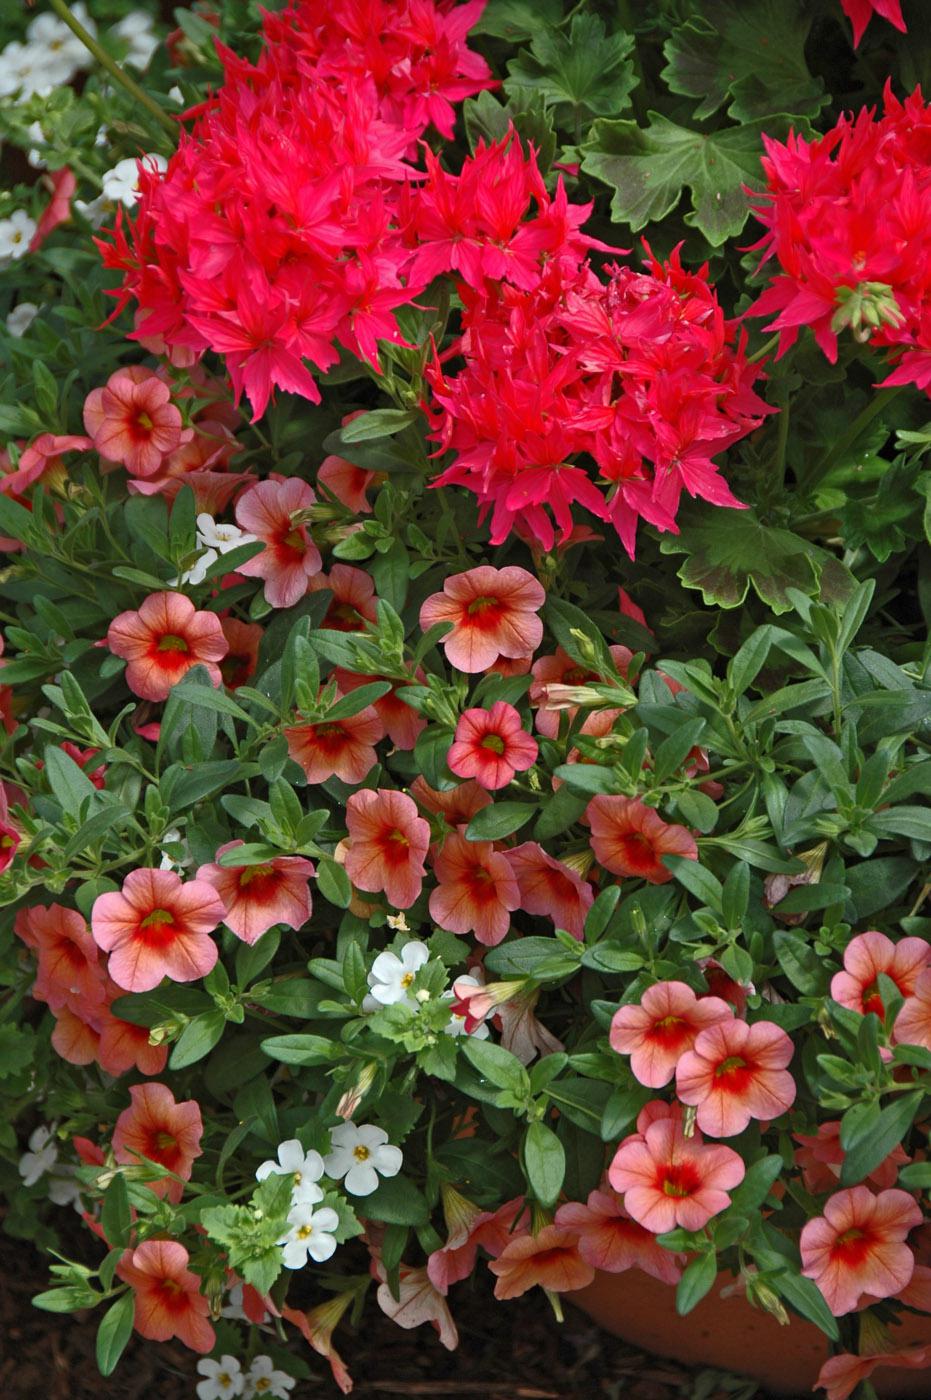 This mixed planting includes the Graffiti Salmon Rose geranium, the Callie Mango calibrachoa and Calypso Jumbo White bacopa. This geranium serves as the thriller plant, and it definitely thrills with flowers that almost seem to glow. The calibrachoa spilled over the edge of the container while bacopa played the filler plant. 